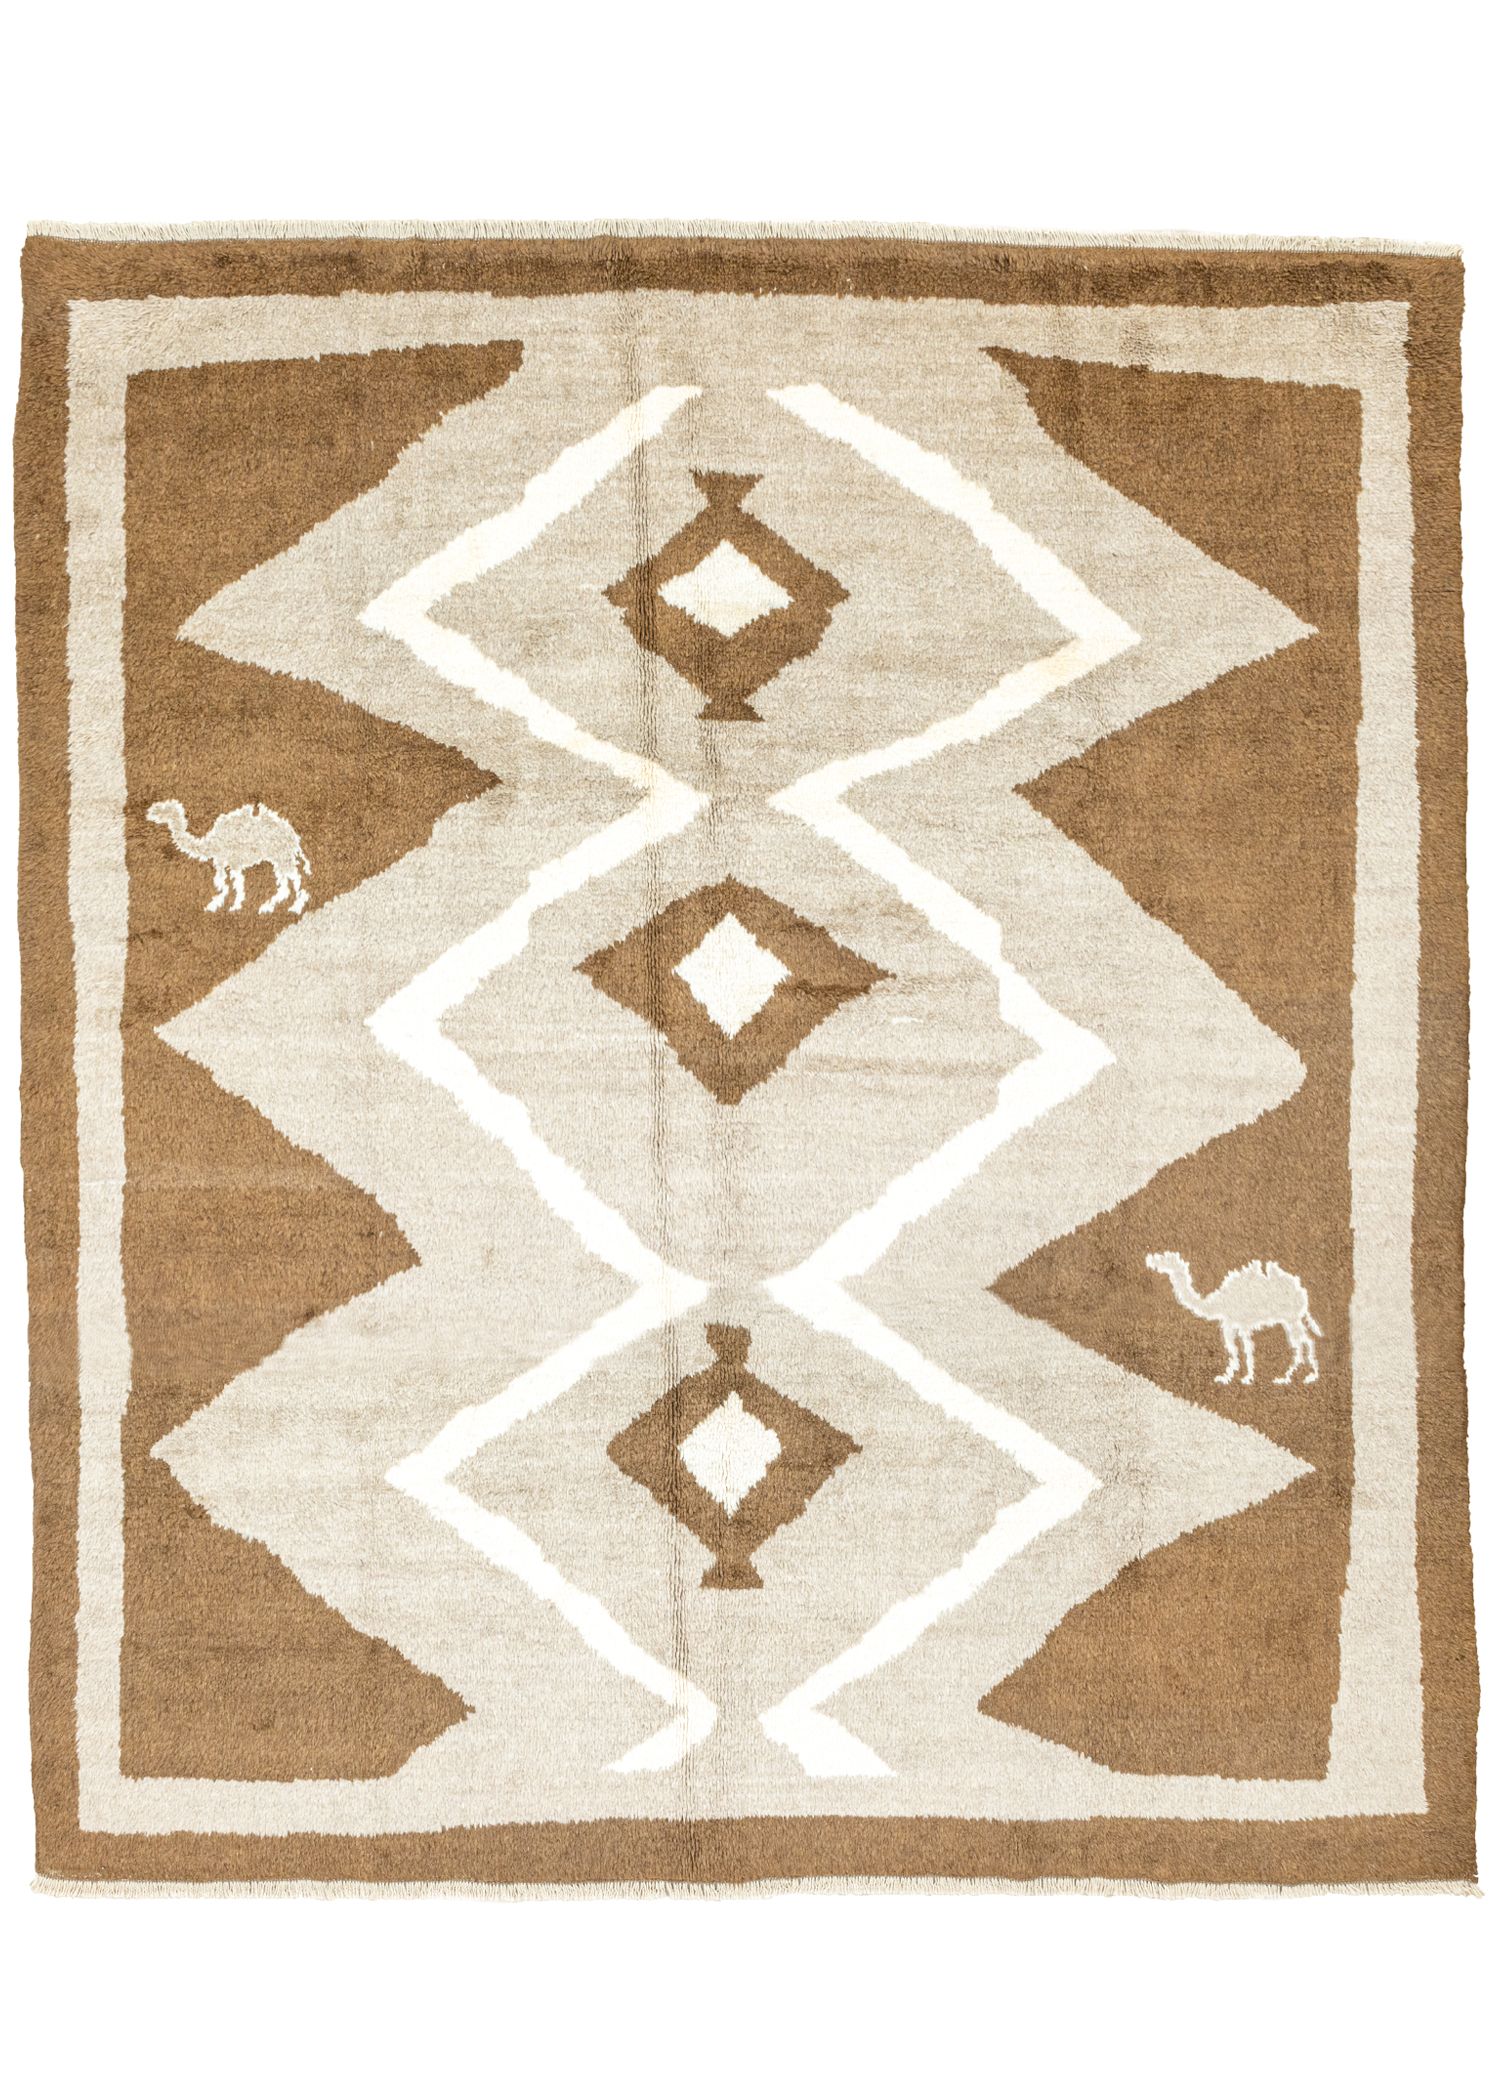 Caisa Camel Figured Hand-Woven Moroccan Rug 269x304 cm